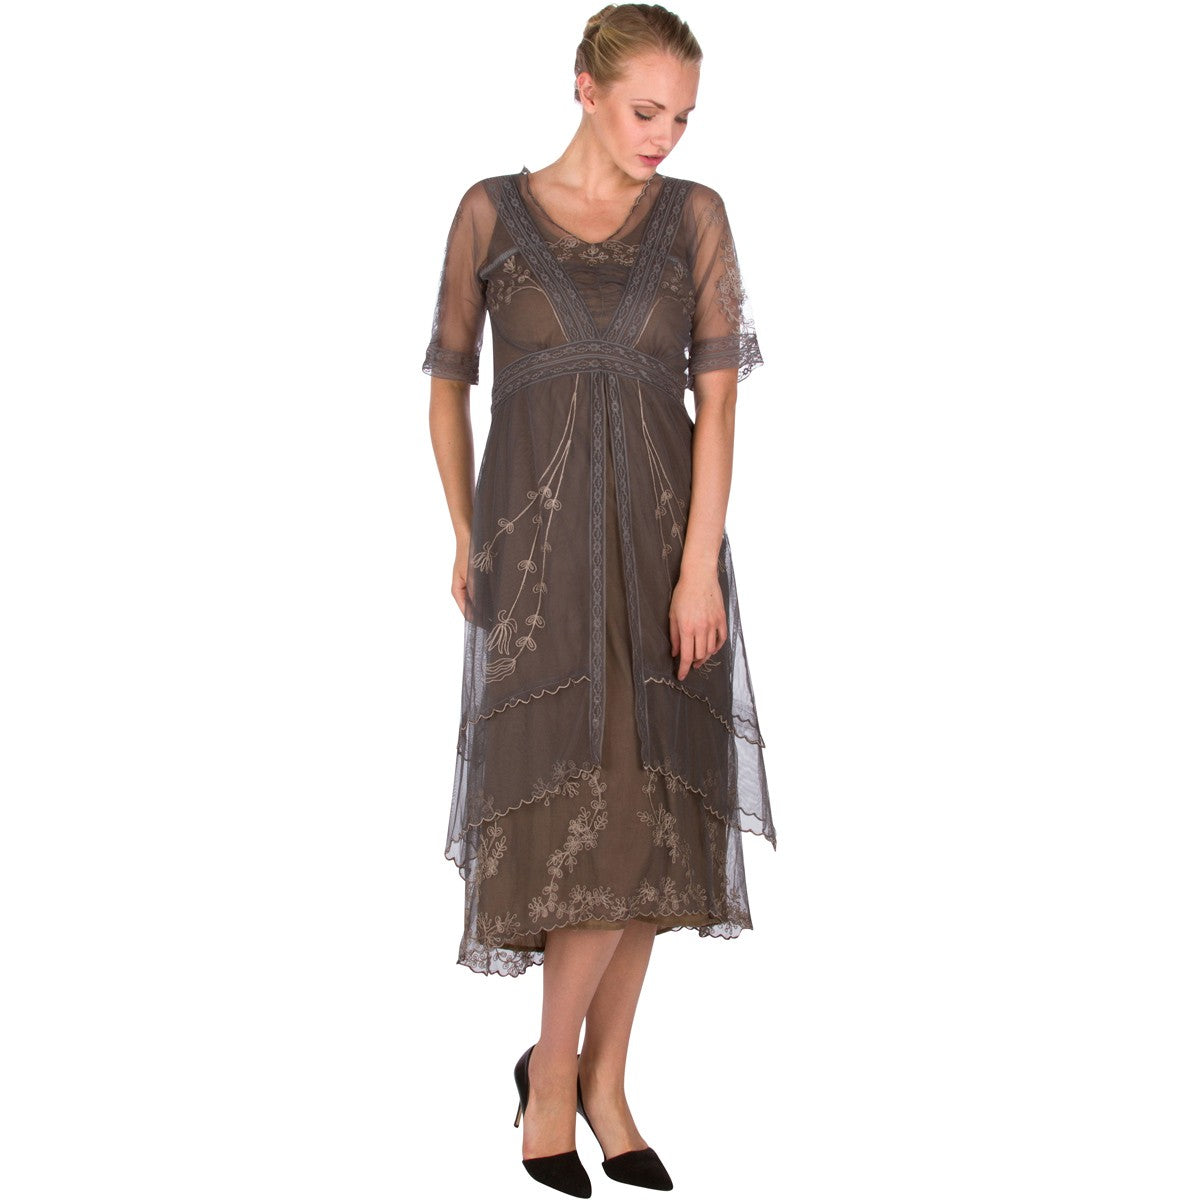 Vintage Inspired Embroidered Party Dress in Moss by Nataya - SOLD OUT